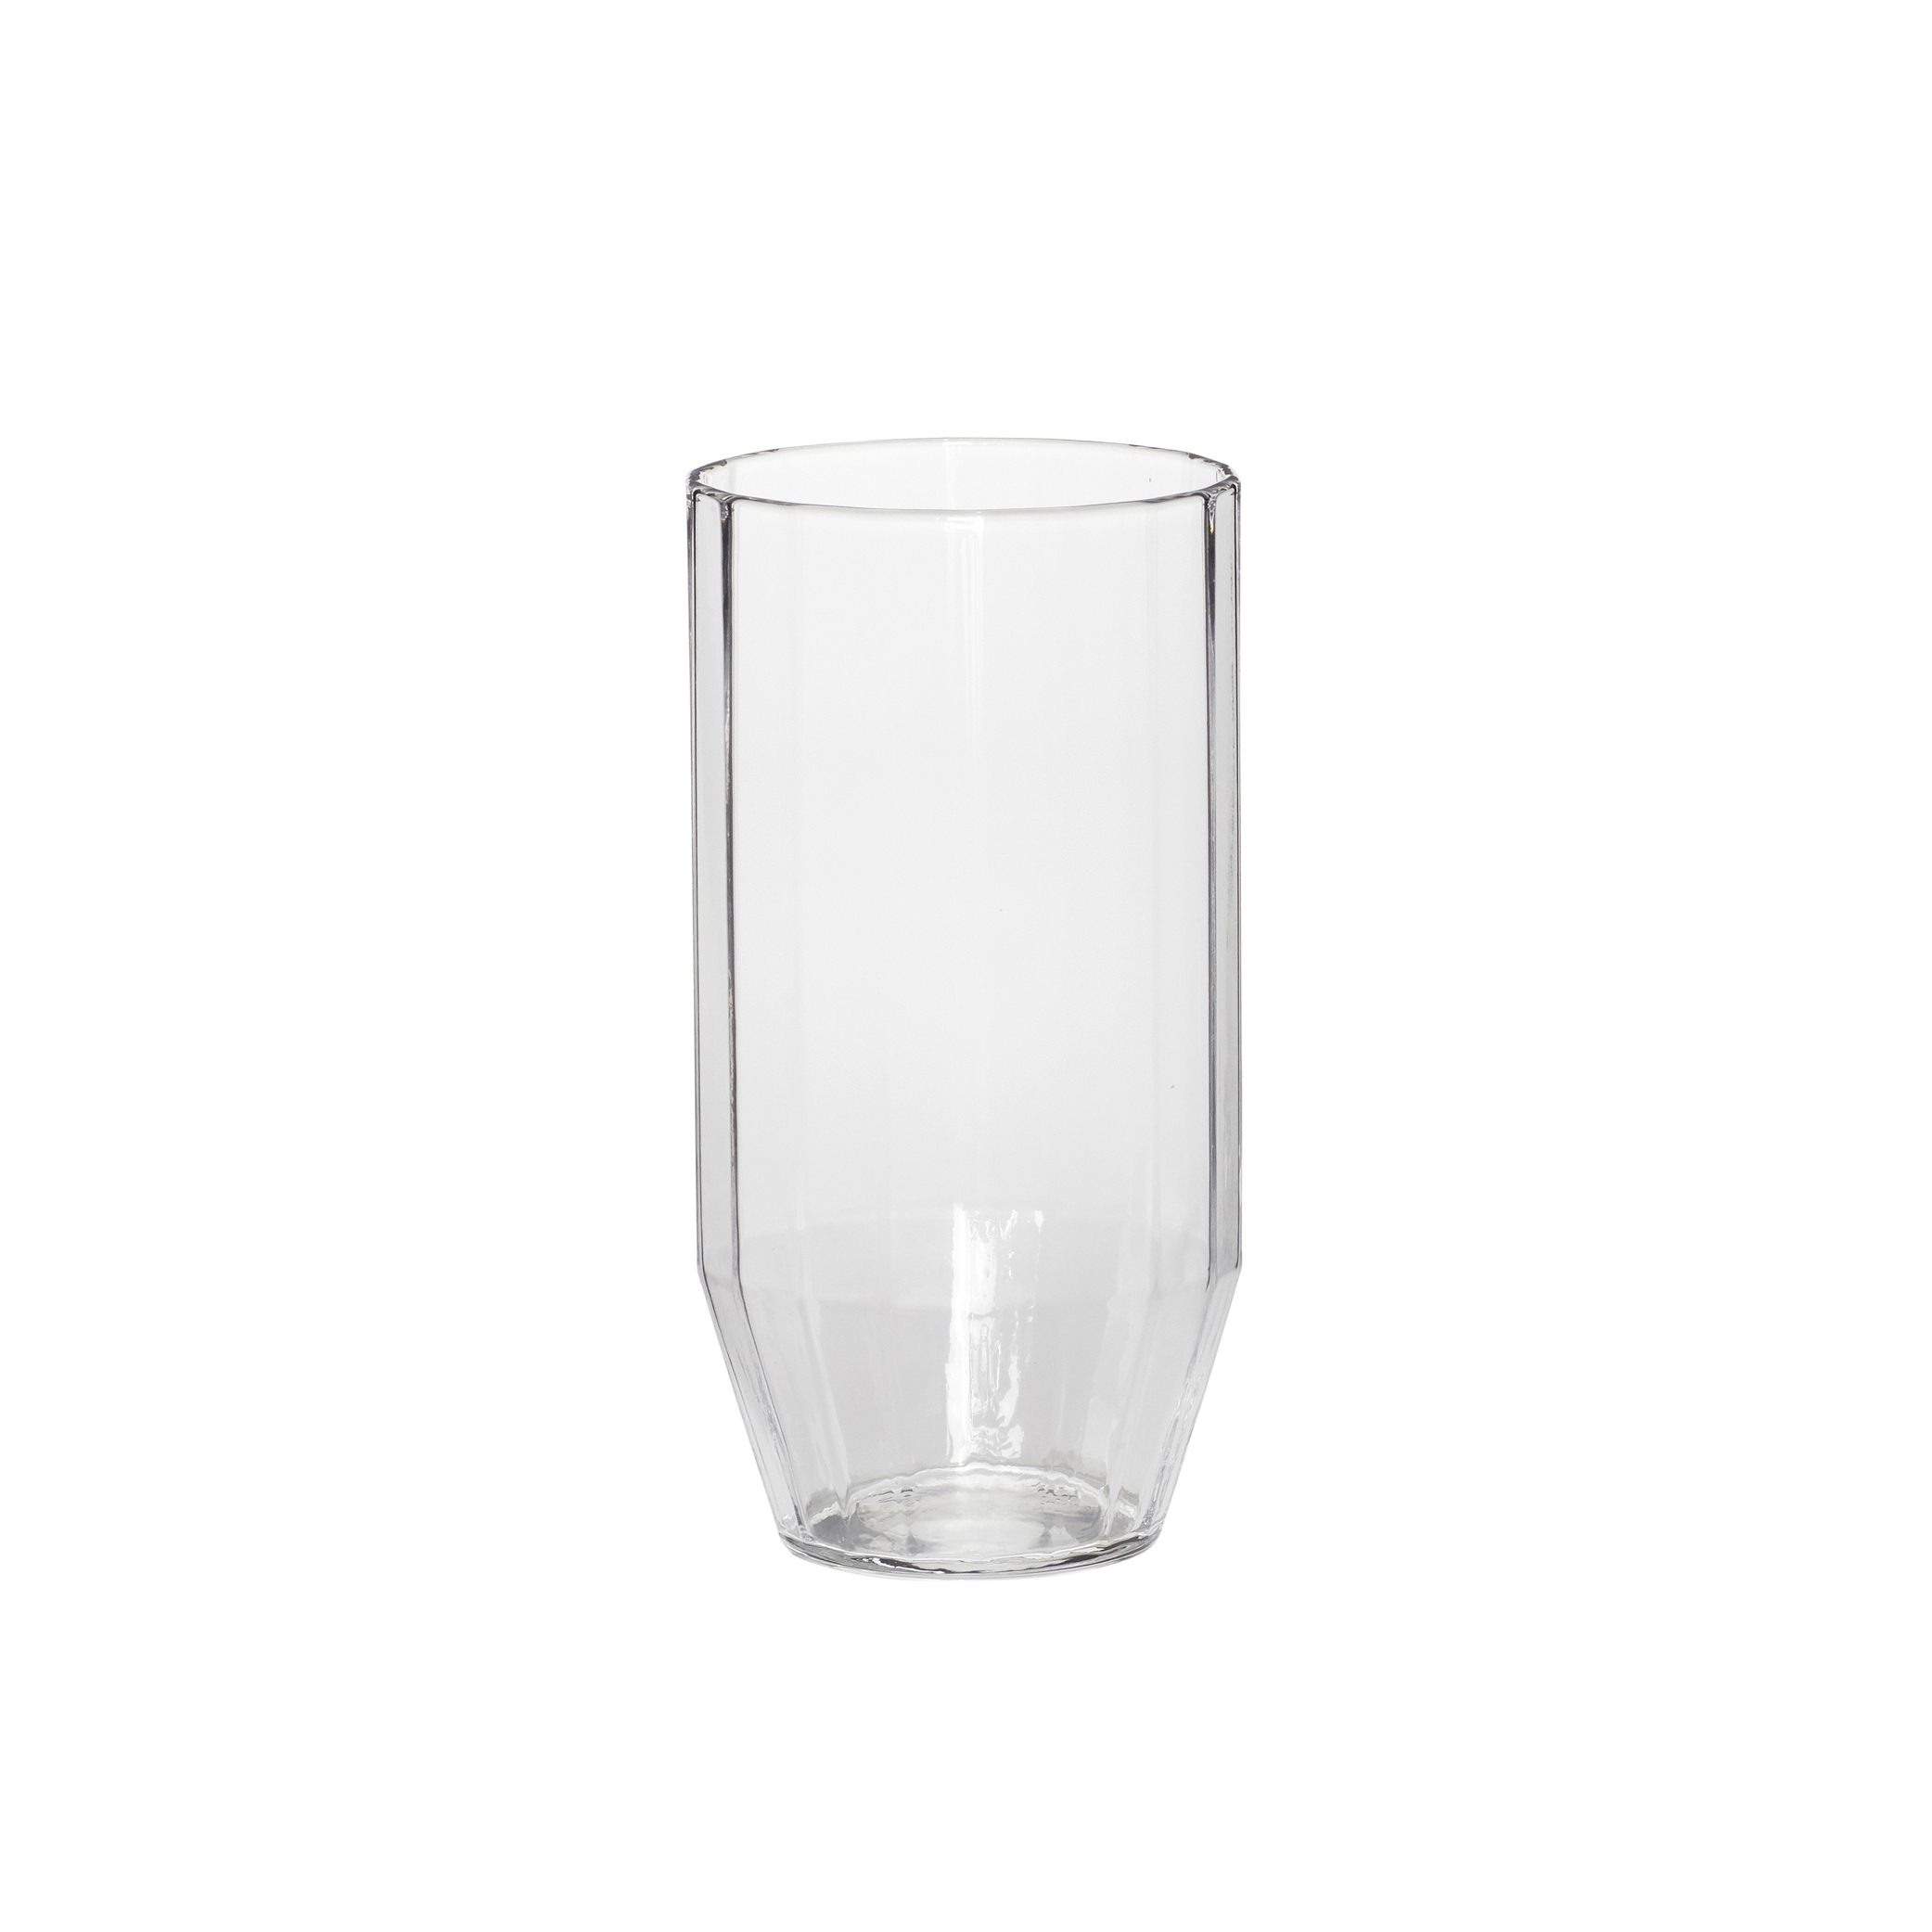 Aster Clear Drinking Glass - Set of 2